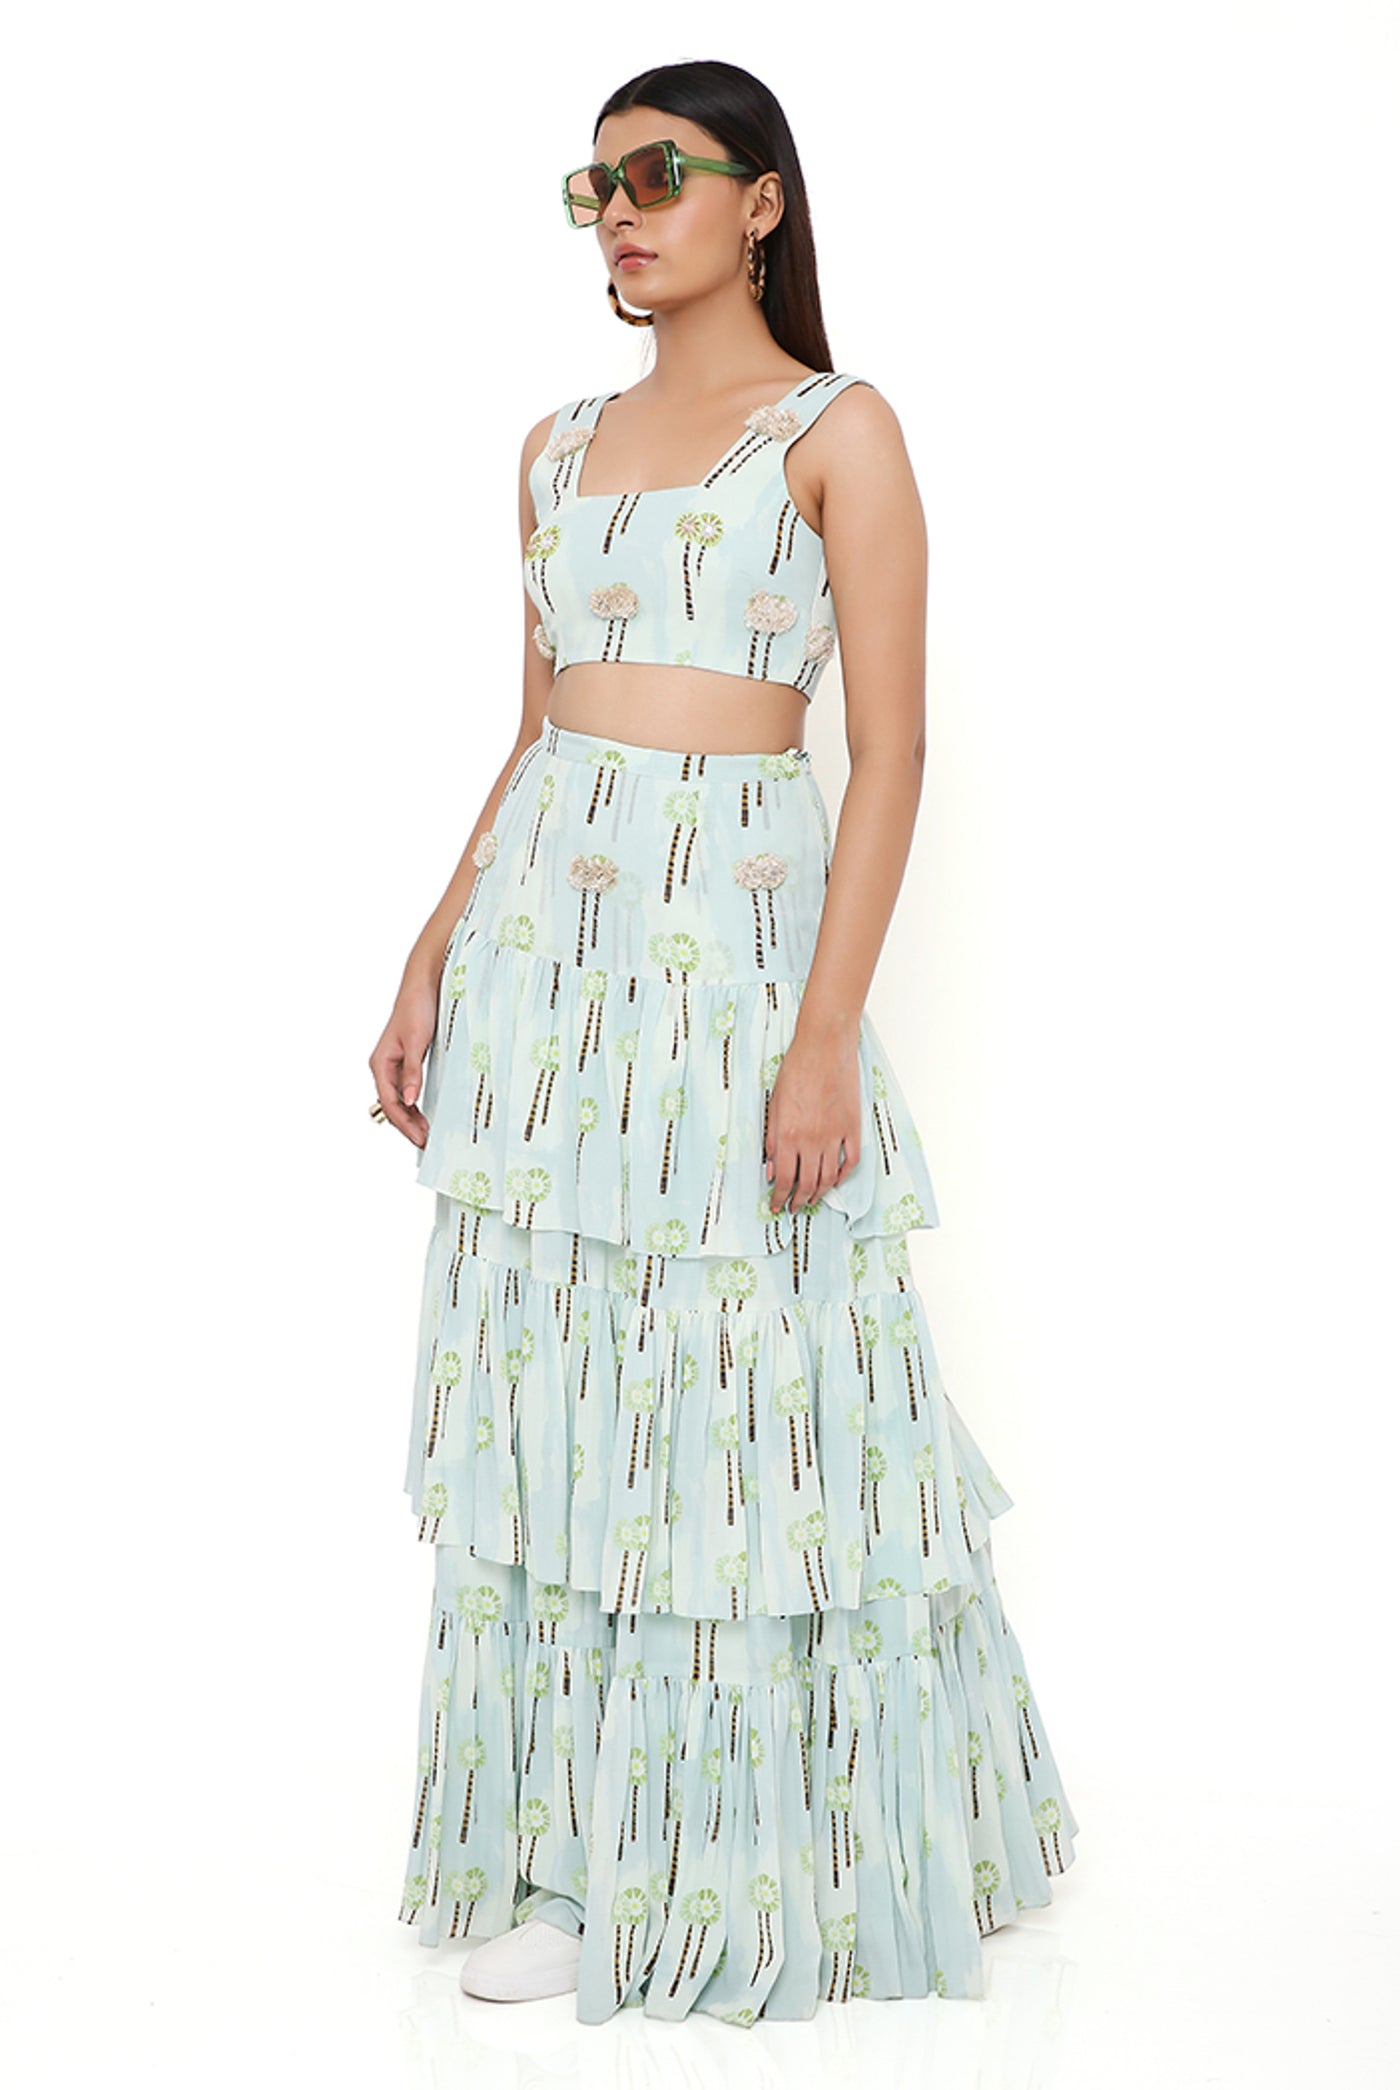 payal singhal Pale Blue Small Palm Georgette Printed Embroidered Top With Embroidered Frill Skirt festive indian designer wear online shopping melange singapore